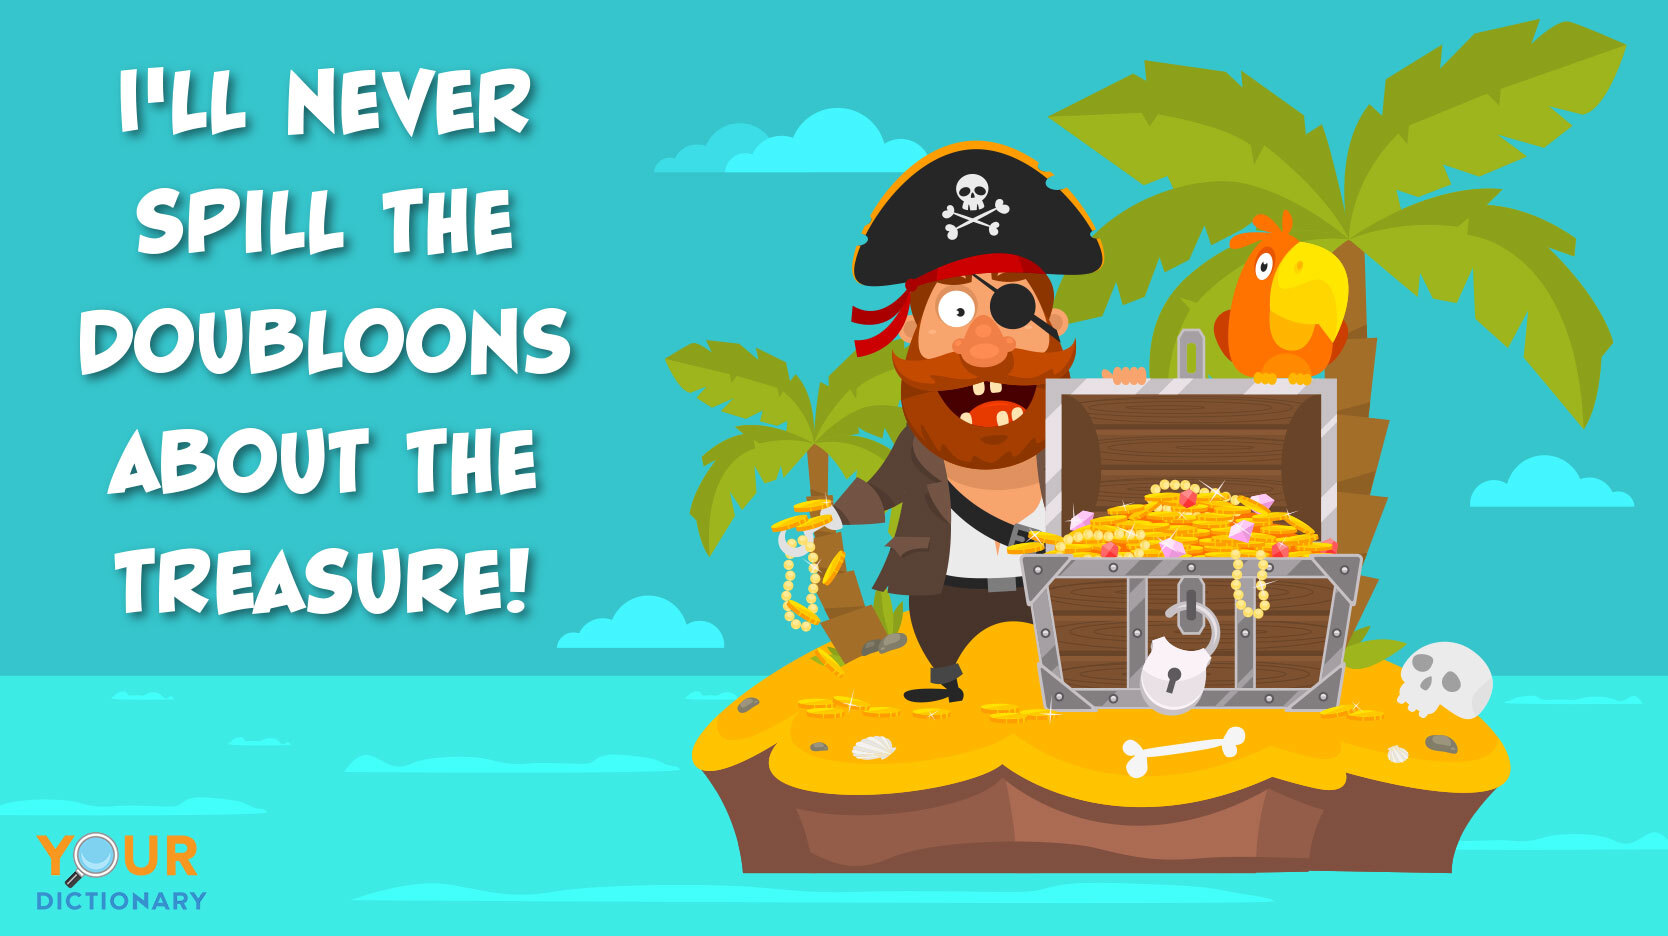 pirate pun spill the doubloons